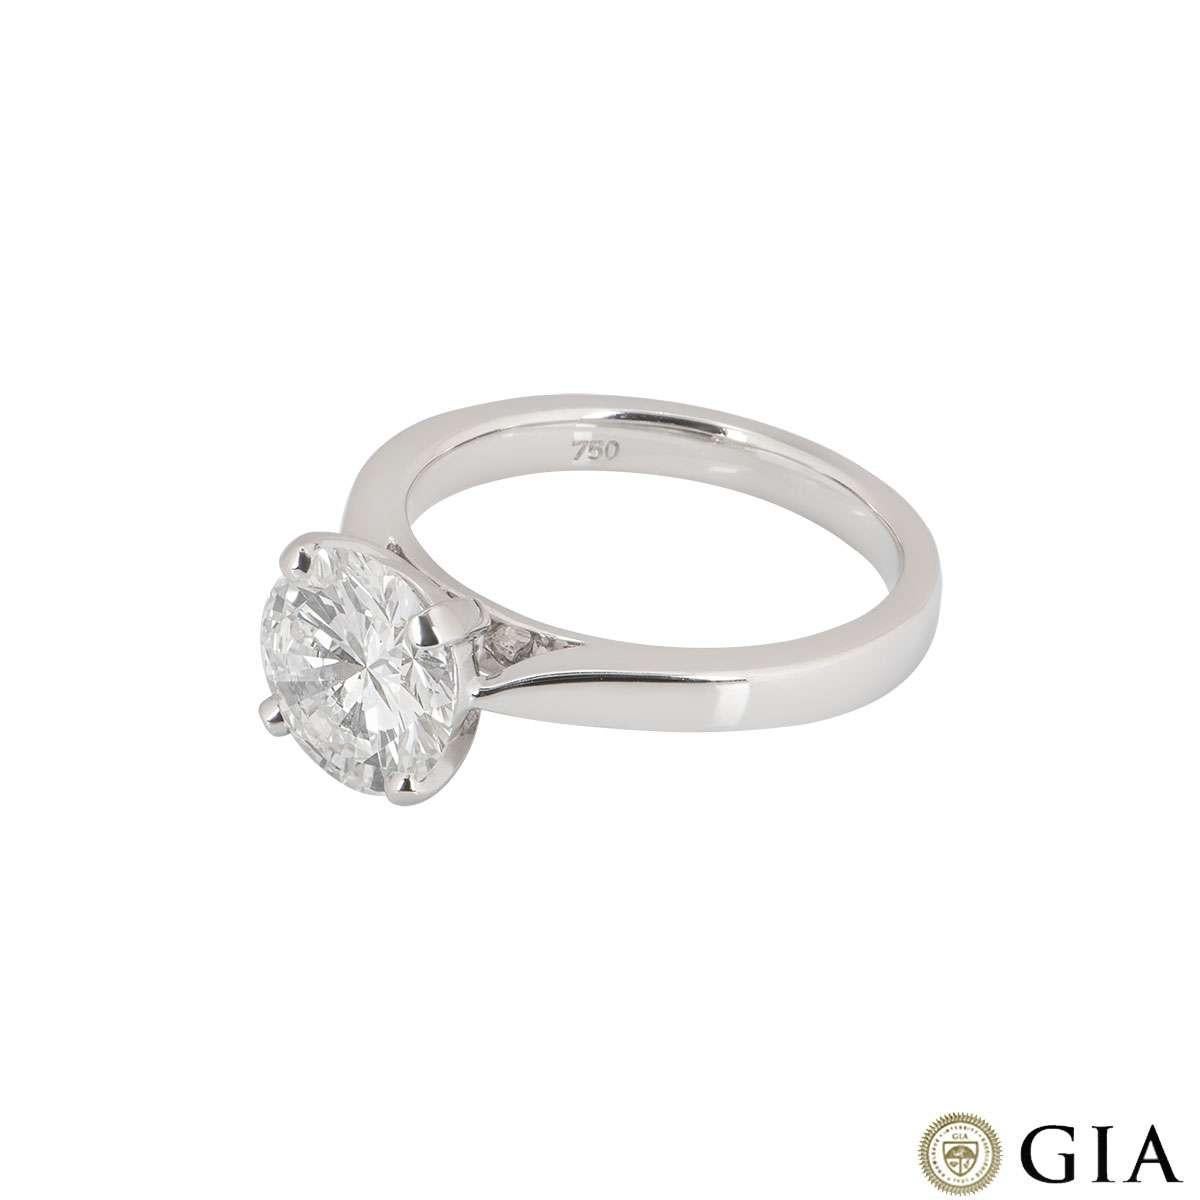 Women's GIA Certified Round Brilliant Cut Diamond Solitaire Engagement Ring 2.08 Carat